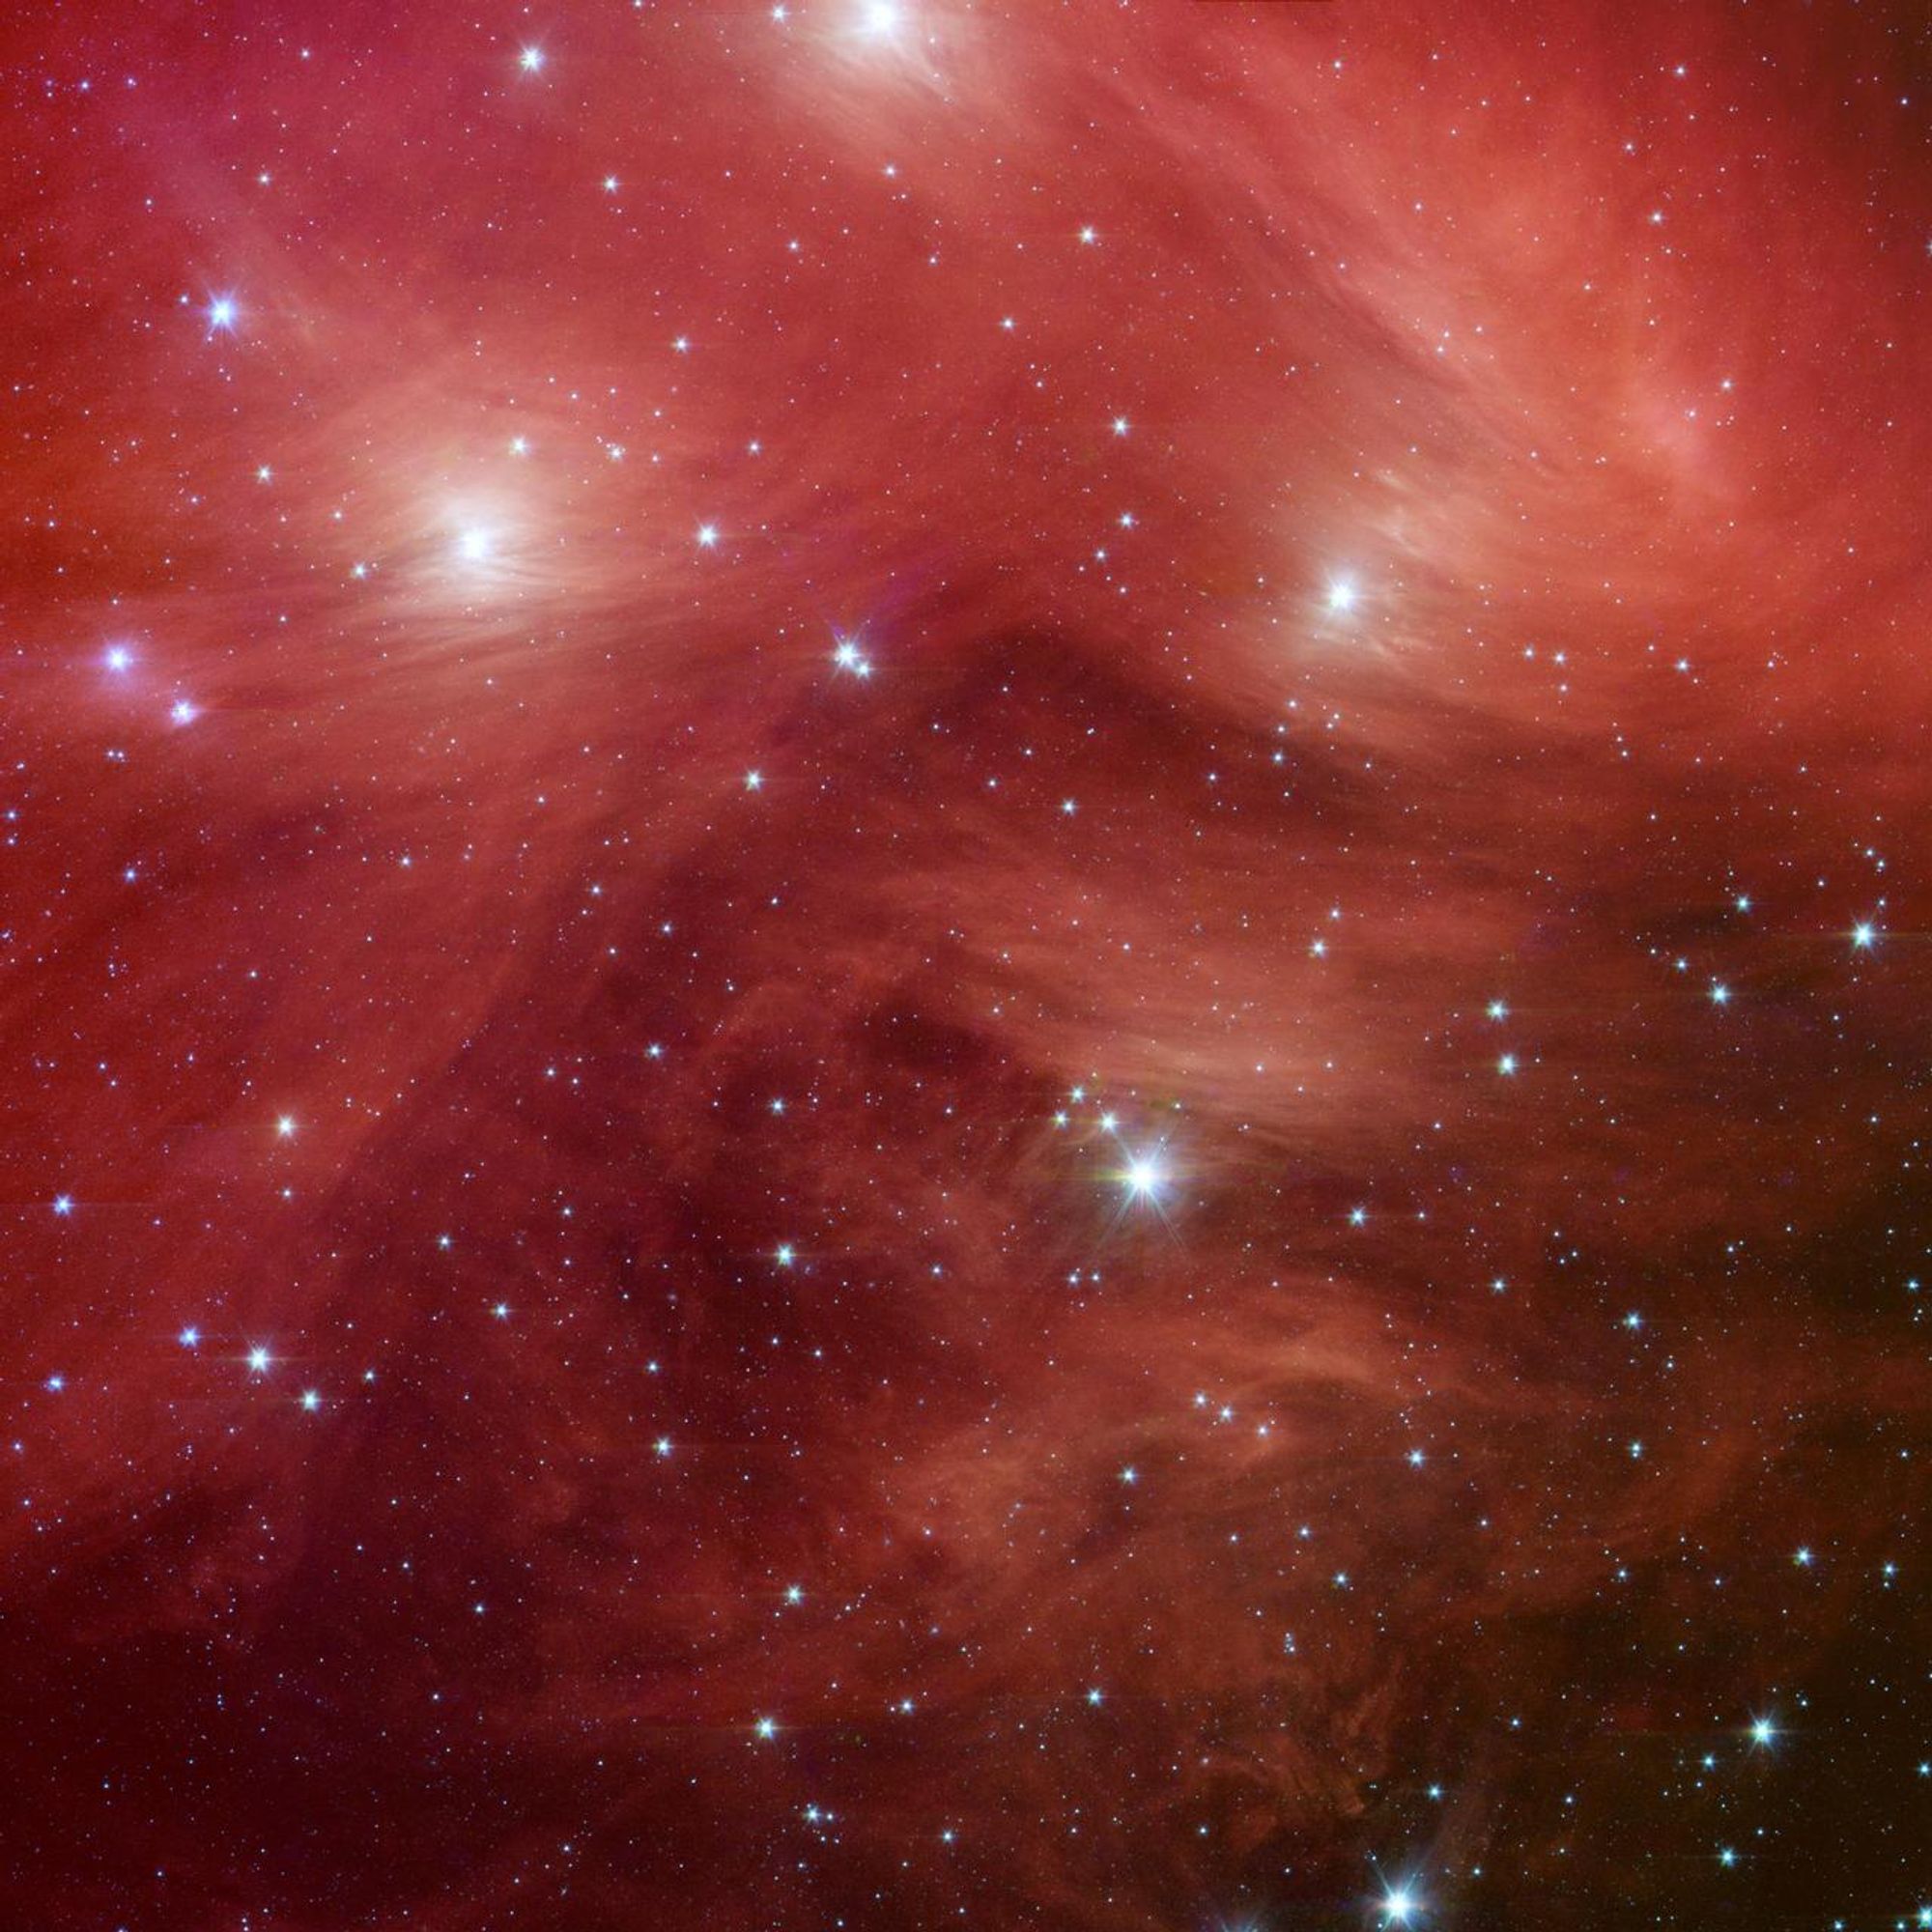 An image of a star cluster washed in red 